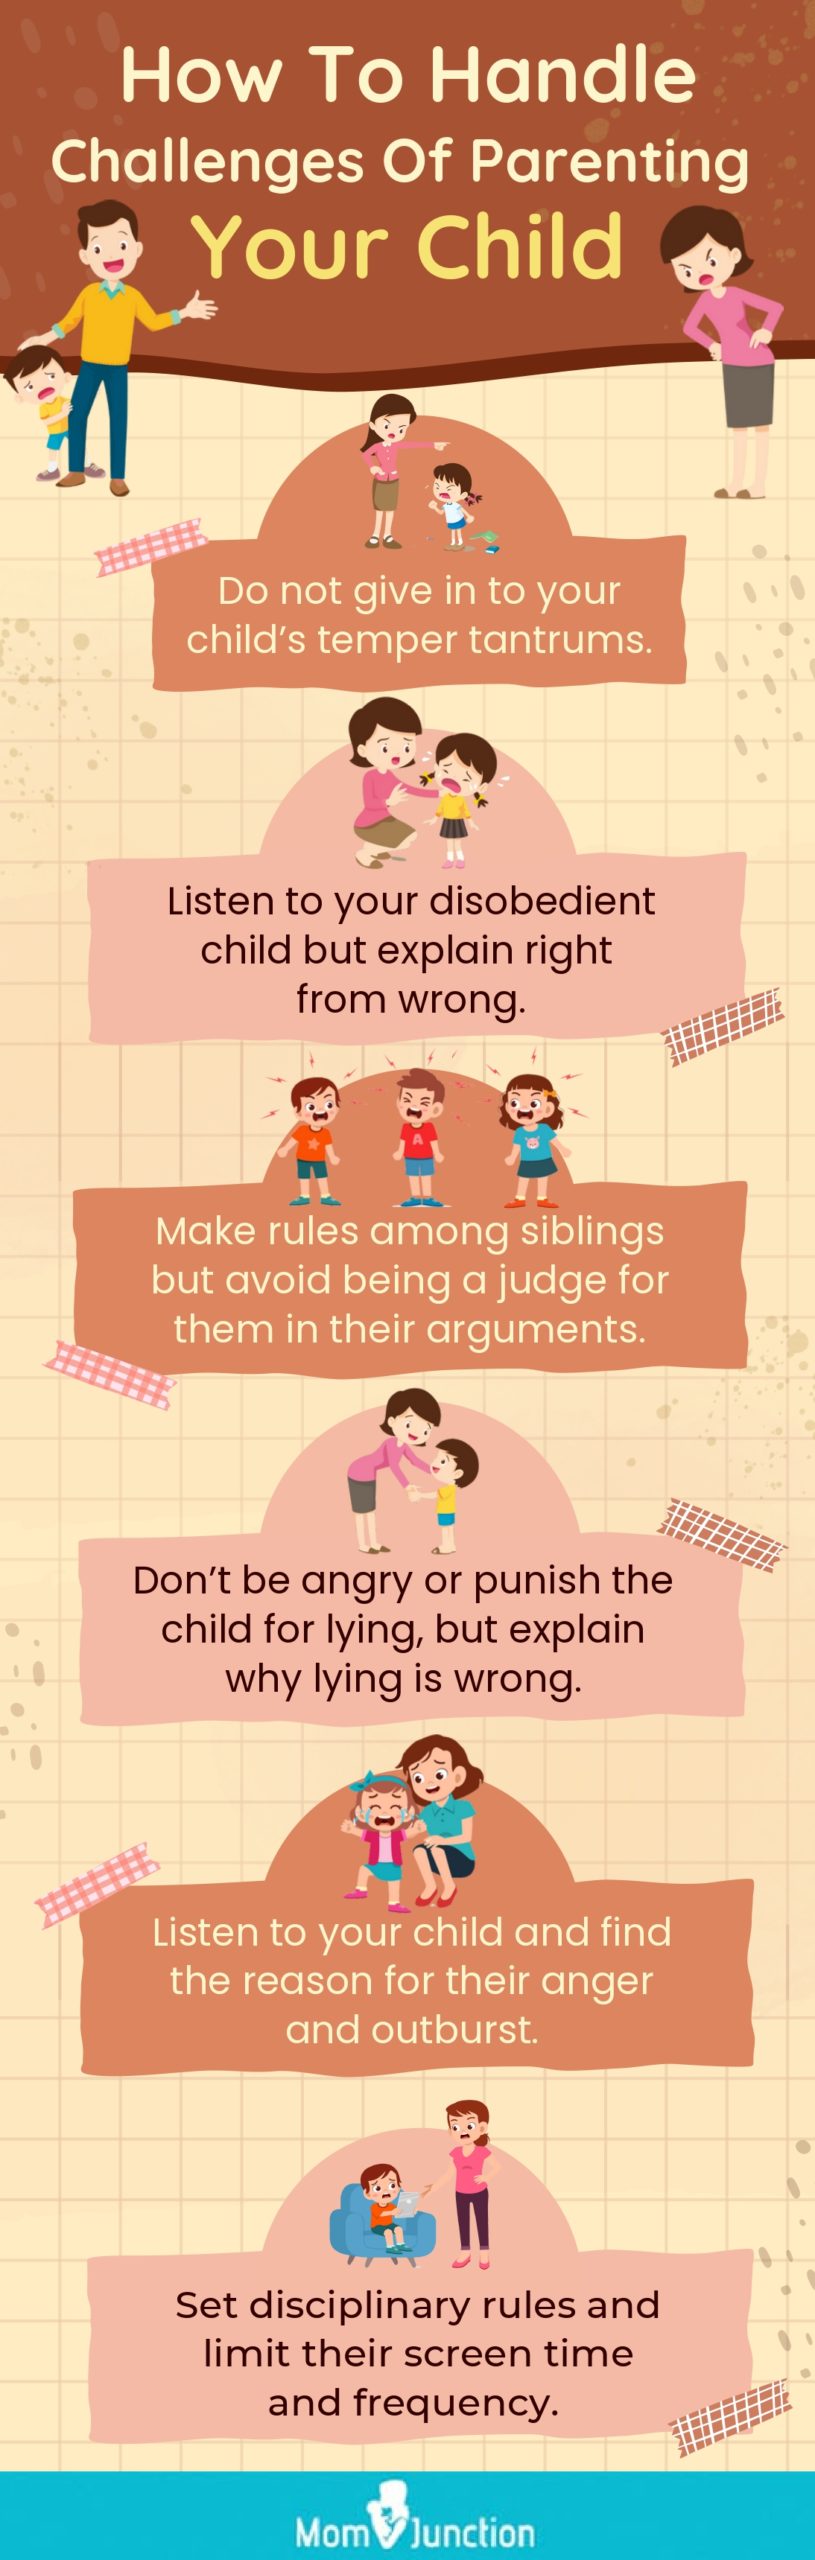 how to handle challenges of parenting your child (infographic)